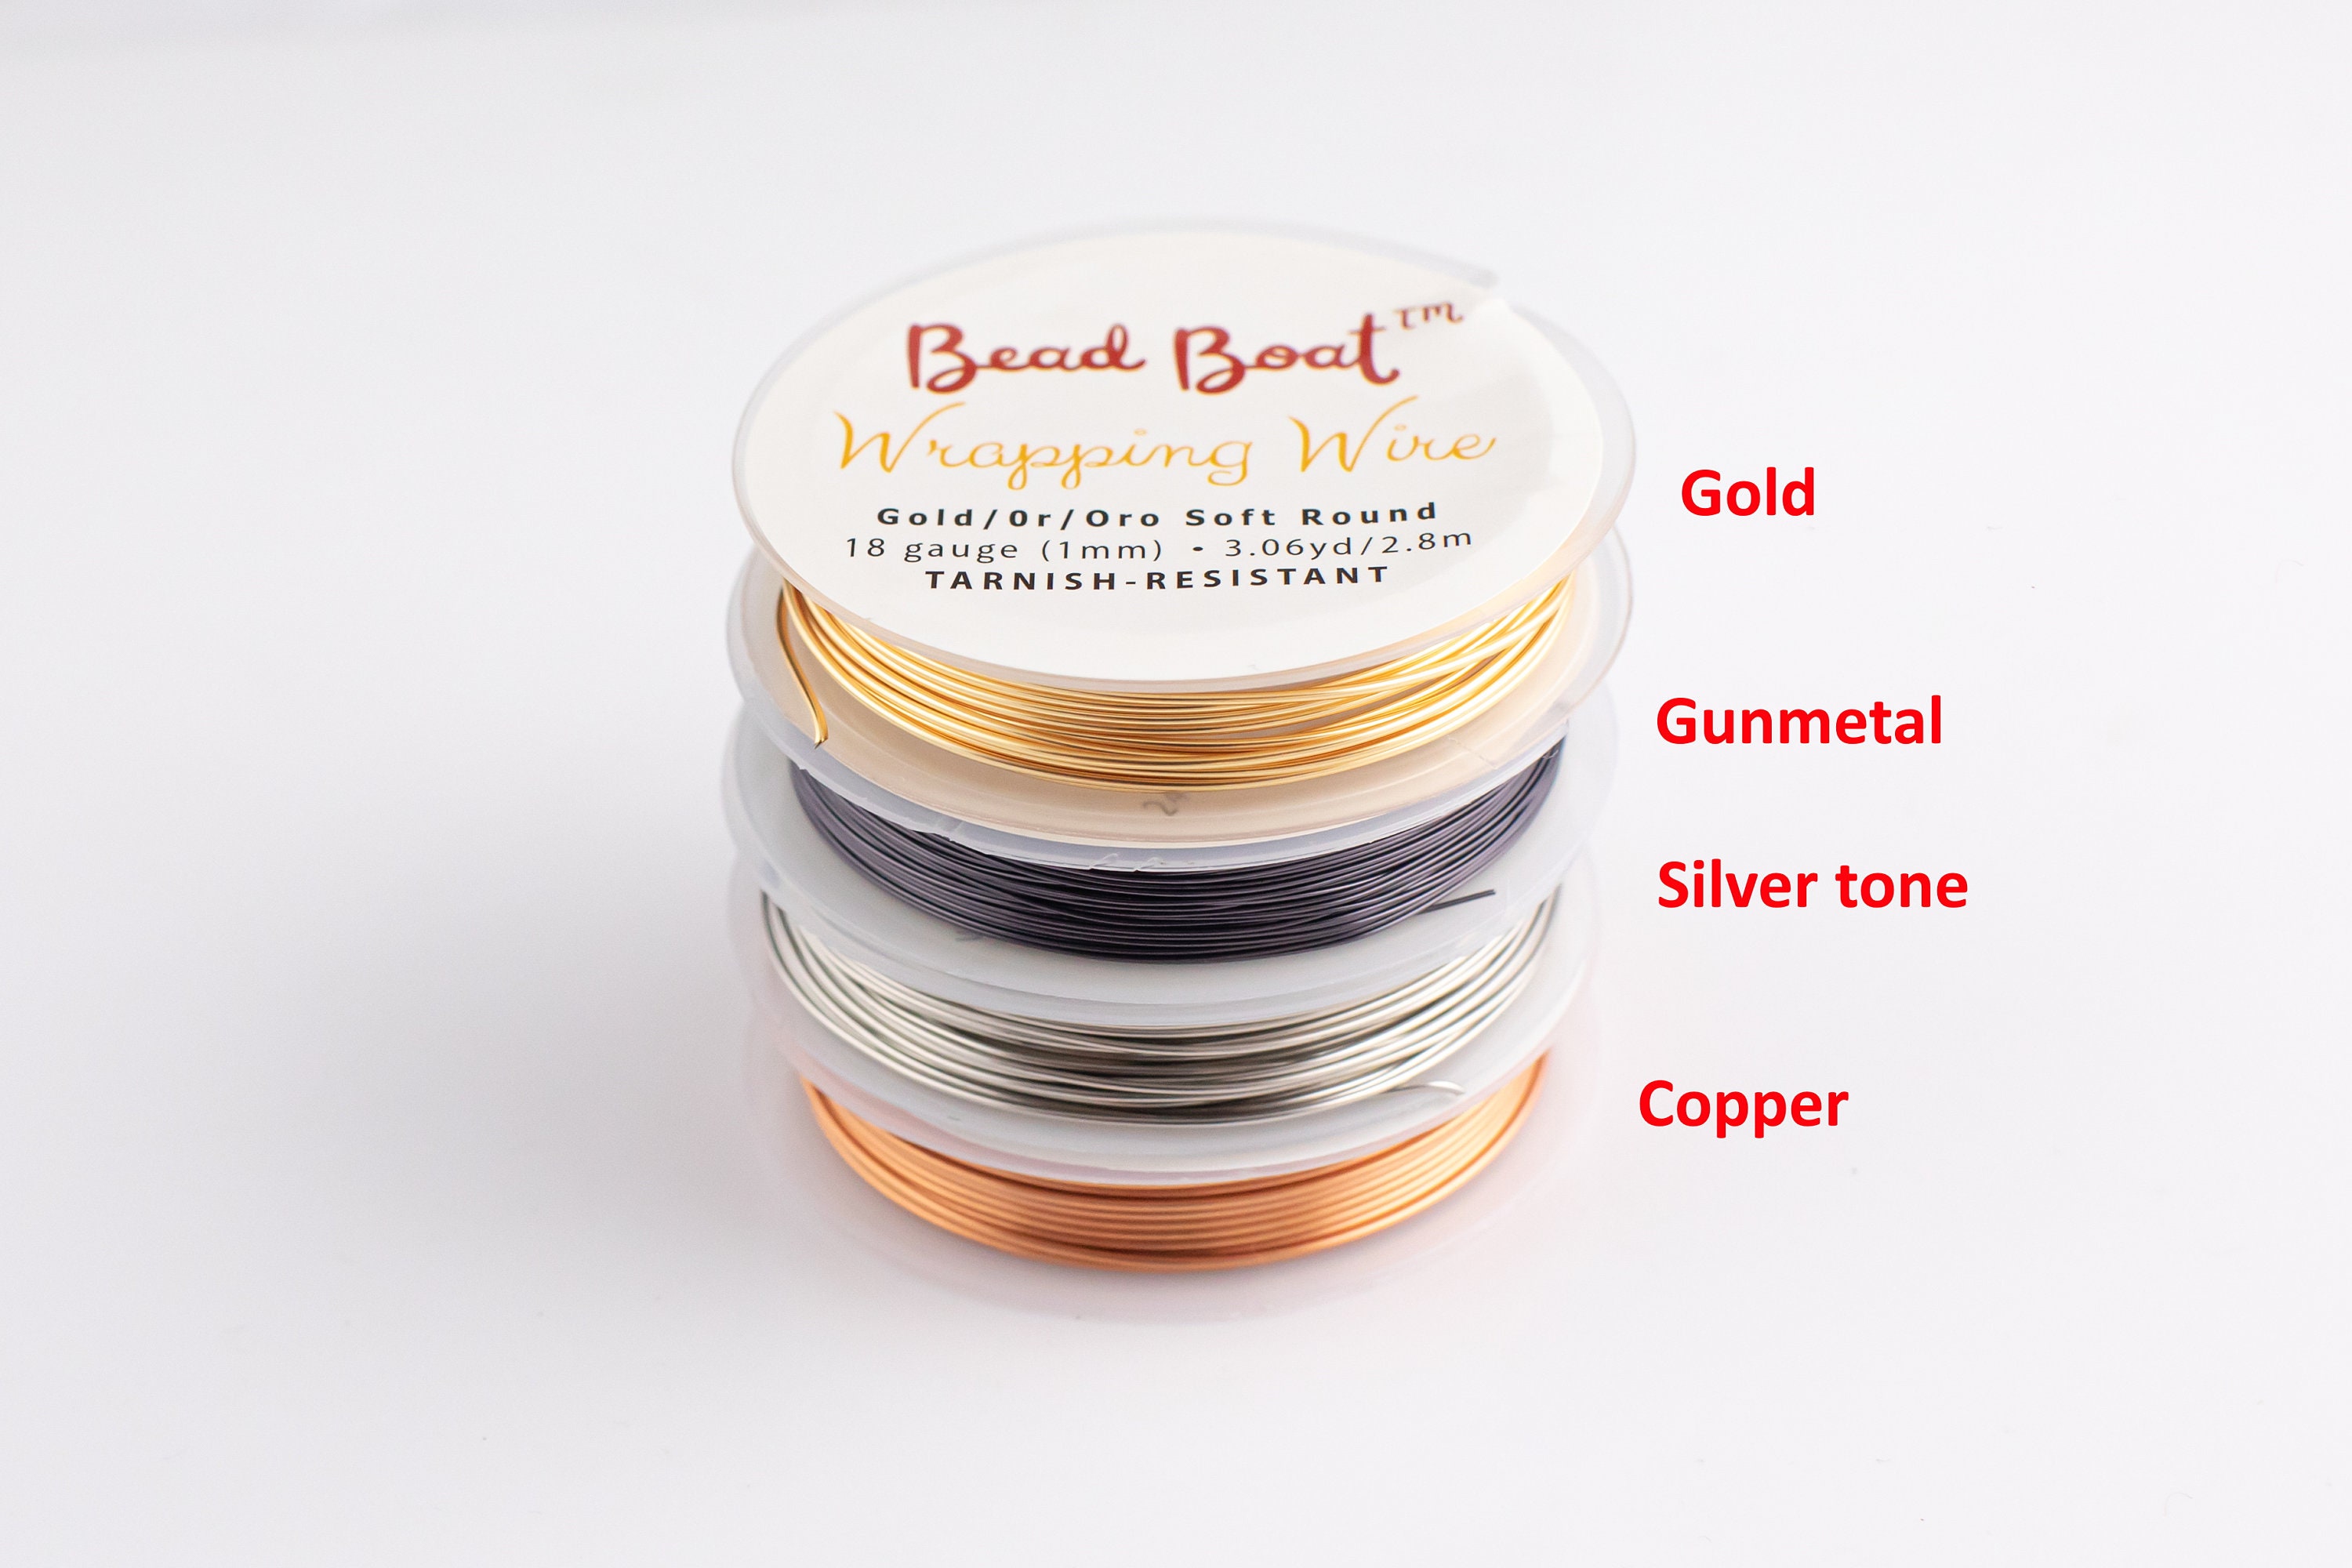  Copper Wire For Jewelry MakingMetal Craft Wire For  CraftsTarnish-Resistant Beading Jewelry Wire Coil Wire For Jewelry Wrapping  Silver 22 Gauge 30 Yards